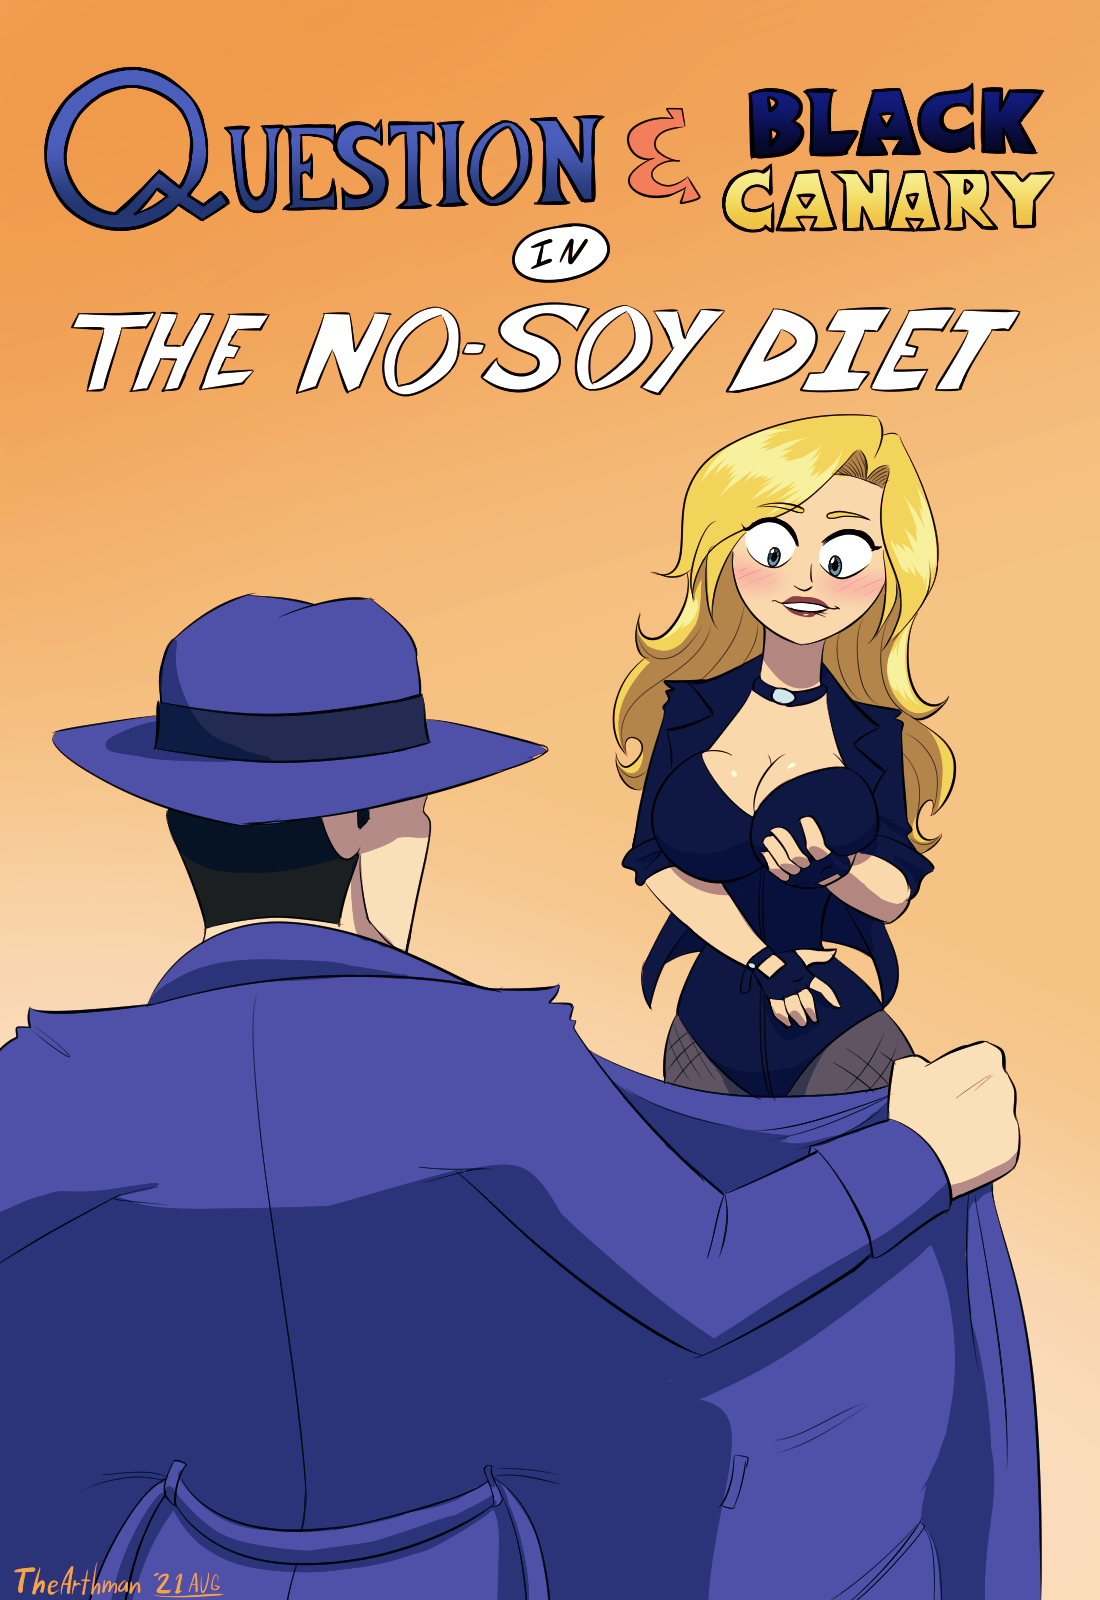 The No-Soy Diet- The Arthman image